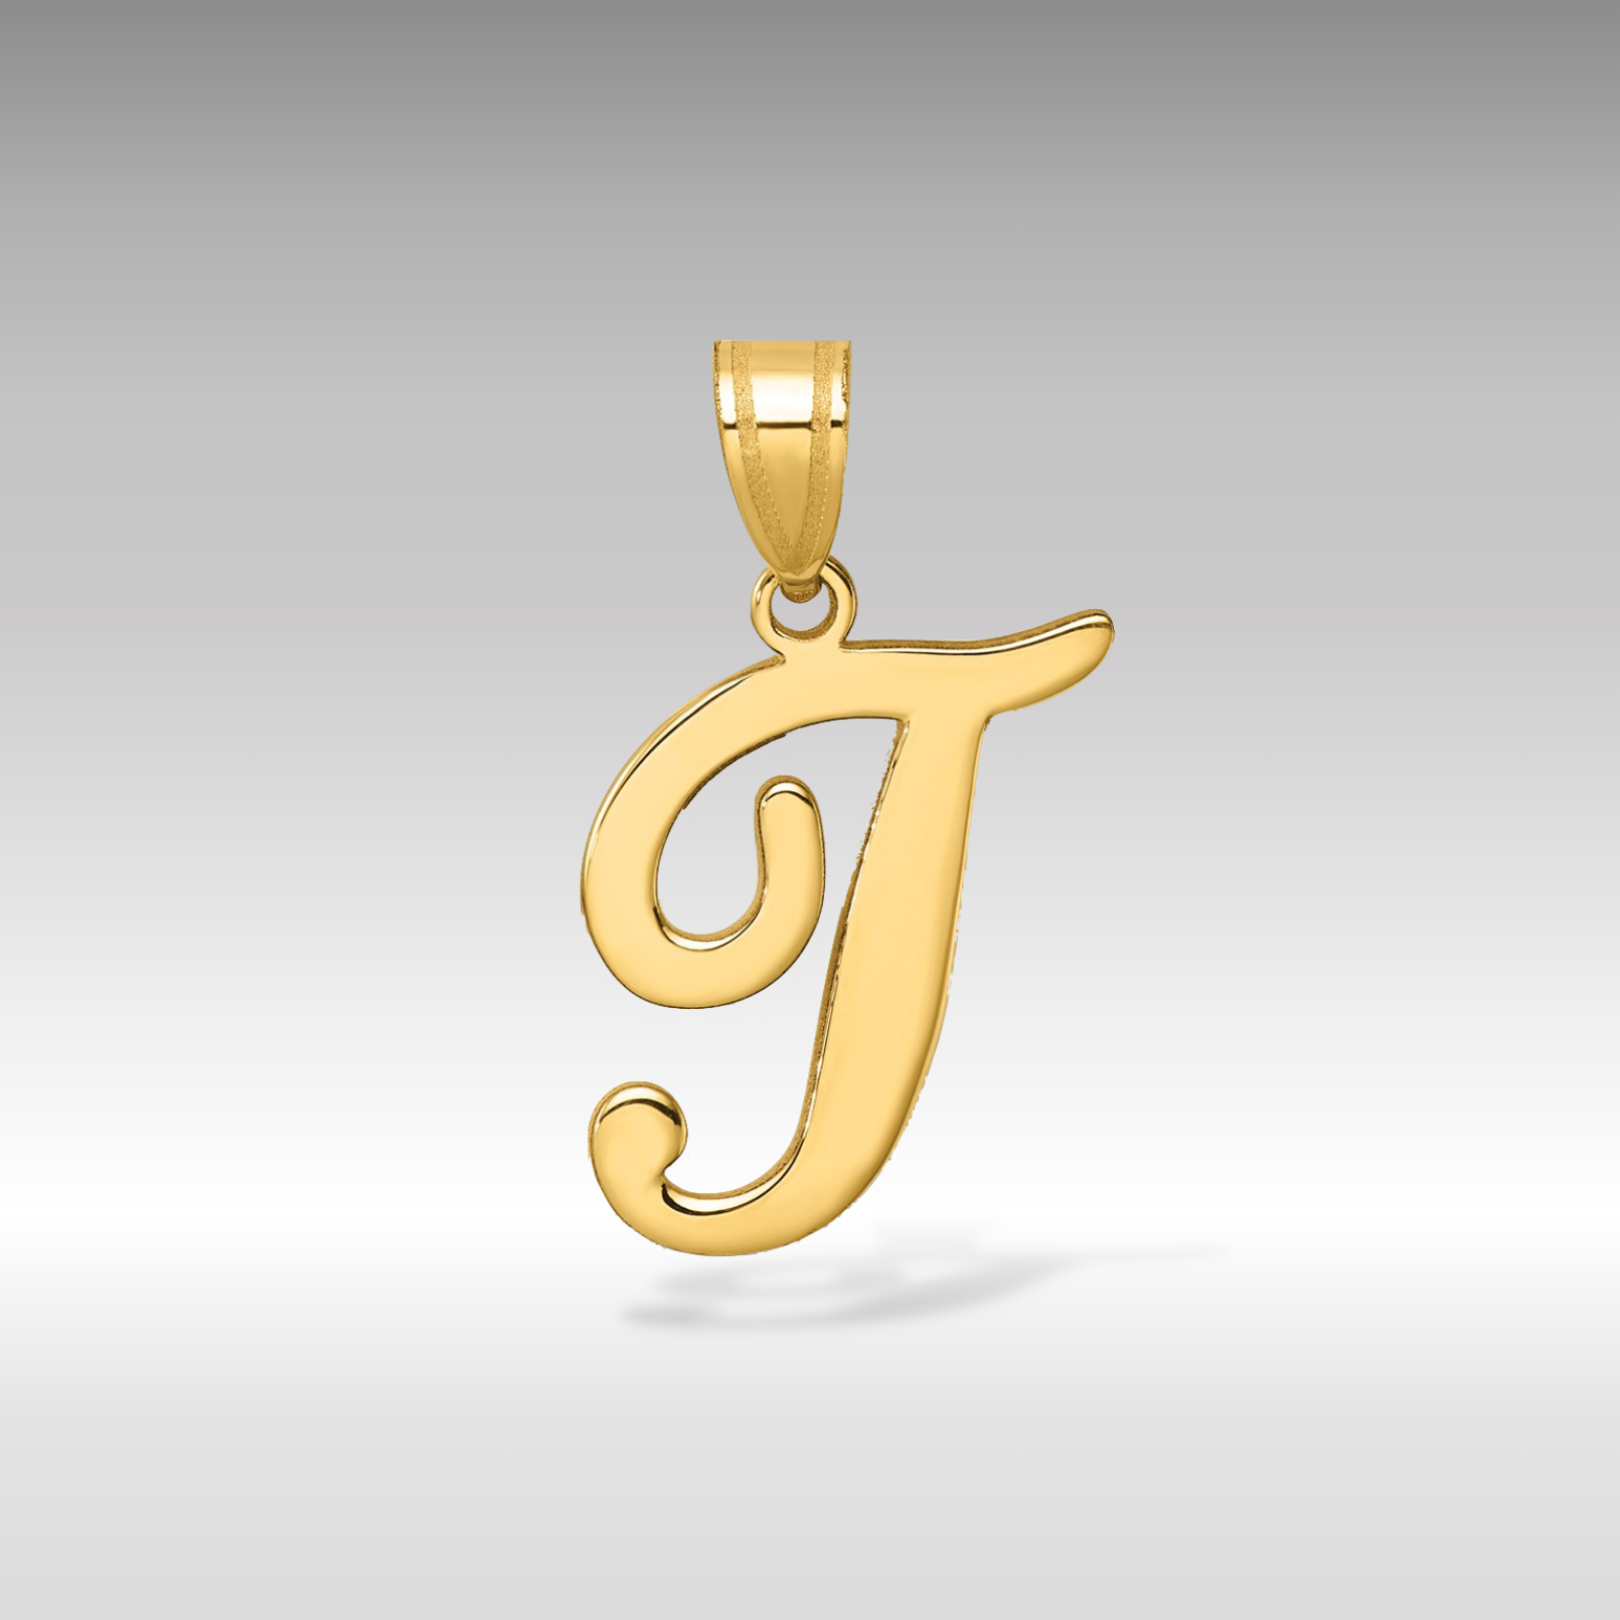 14K Gold Large Letter "T" Script Initial Pendant - Charlie & Co. Jewelry